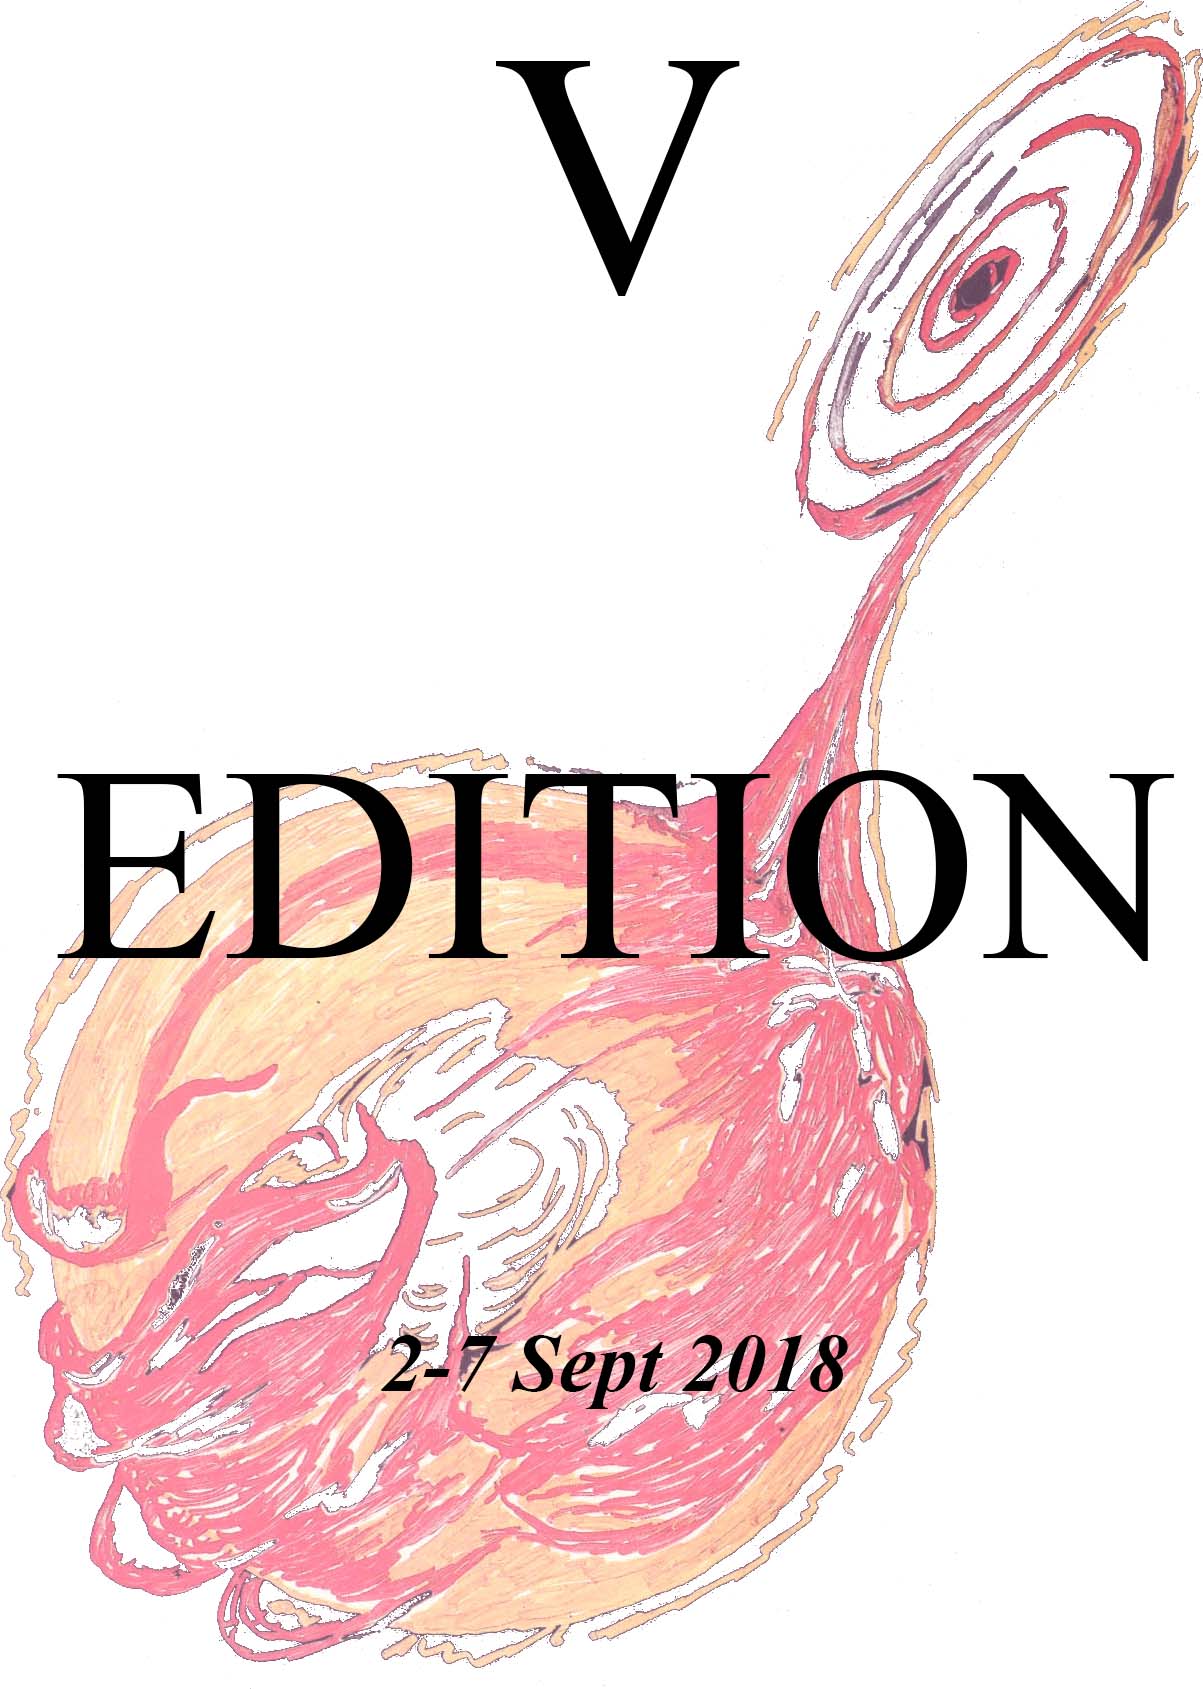 The Golden Age of Cataclysmic Variables and Related Objects V, 2 - 7 SEPTEMBER 2019